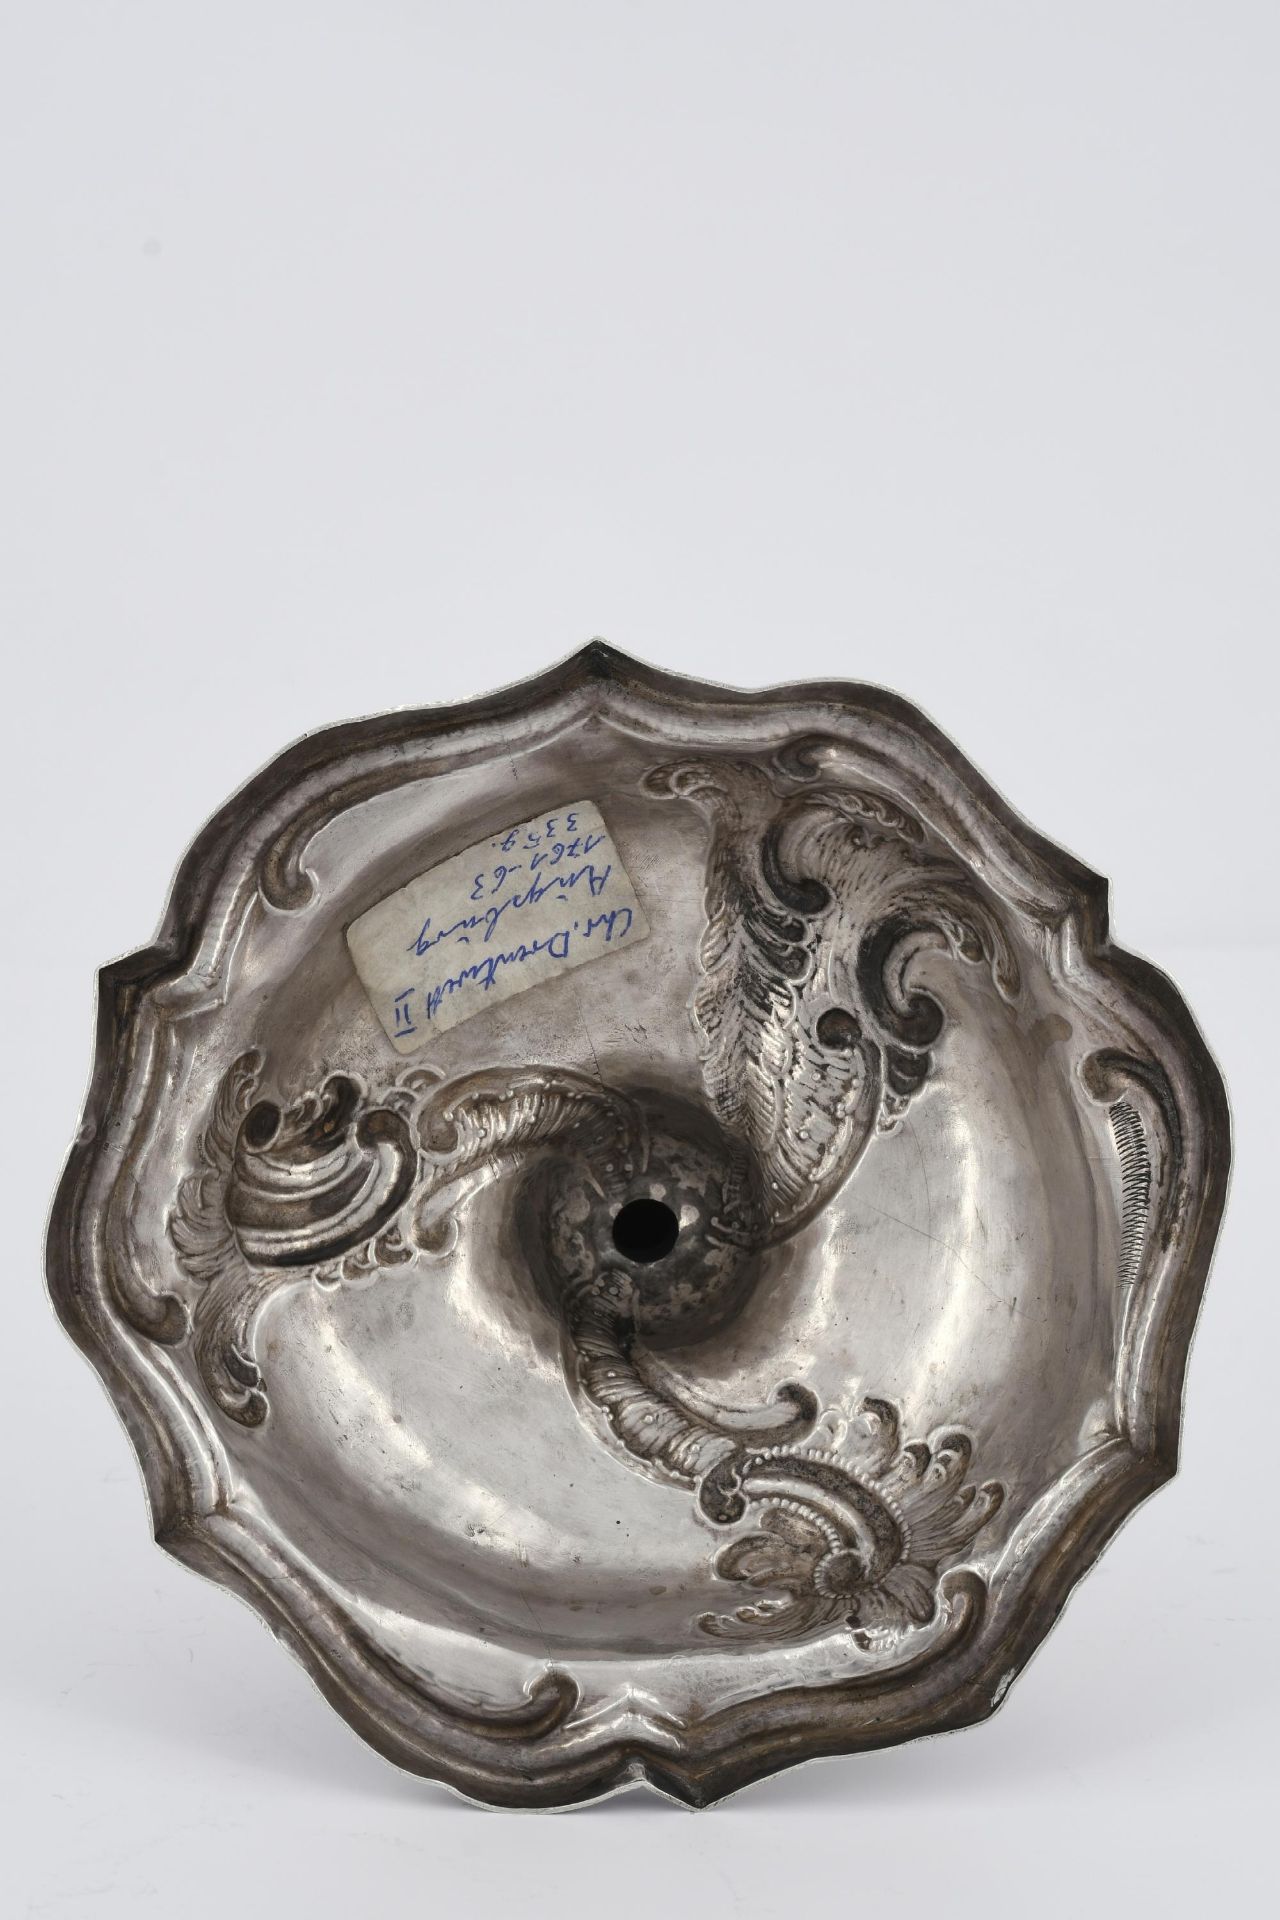 Rococo silver candlestick - Image 6 of 7